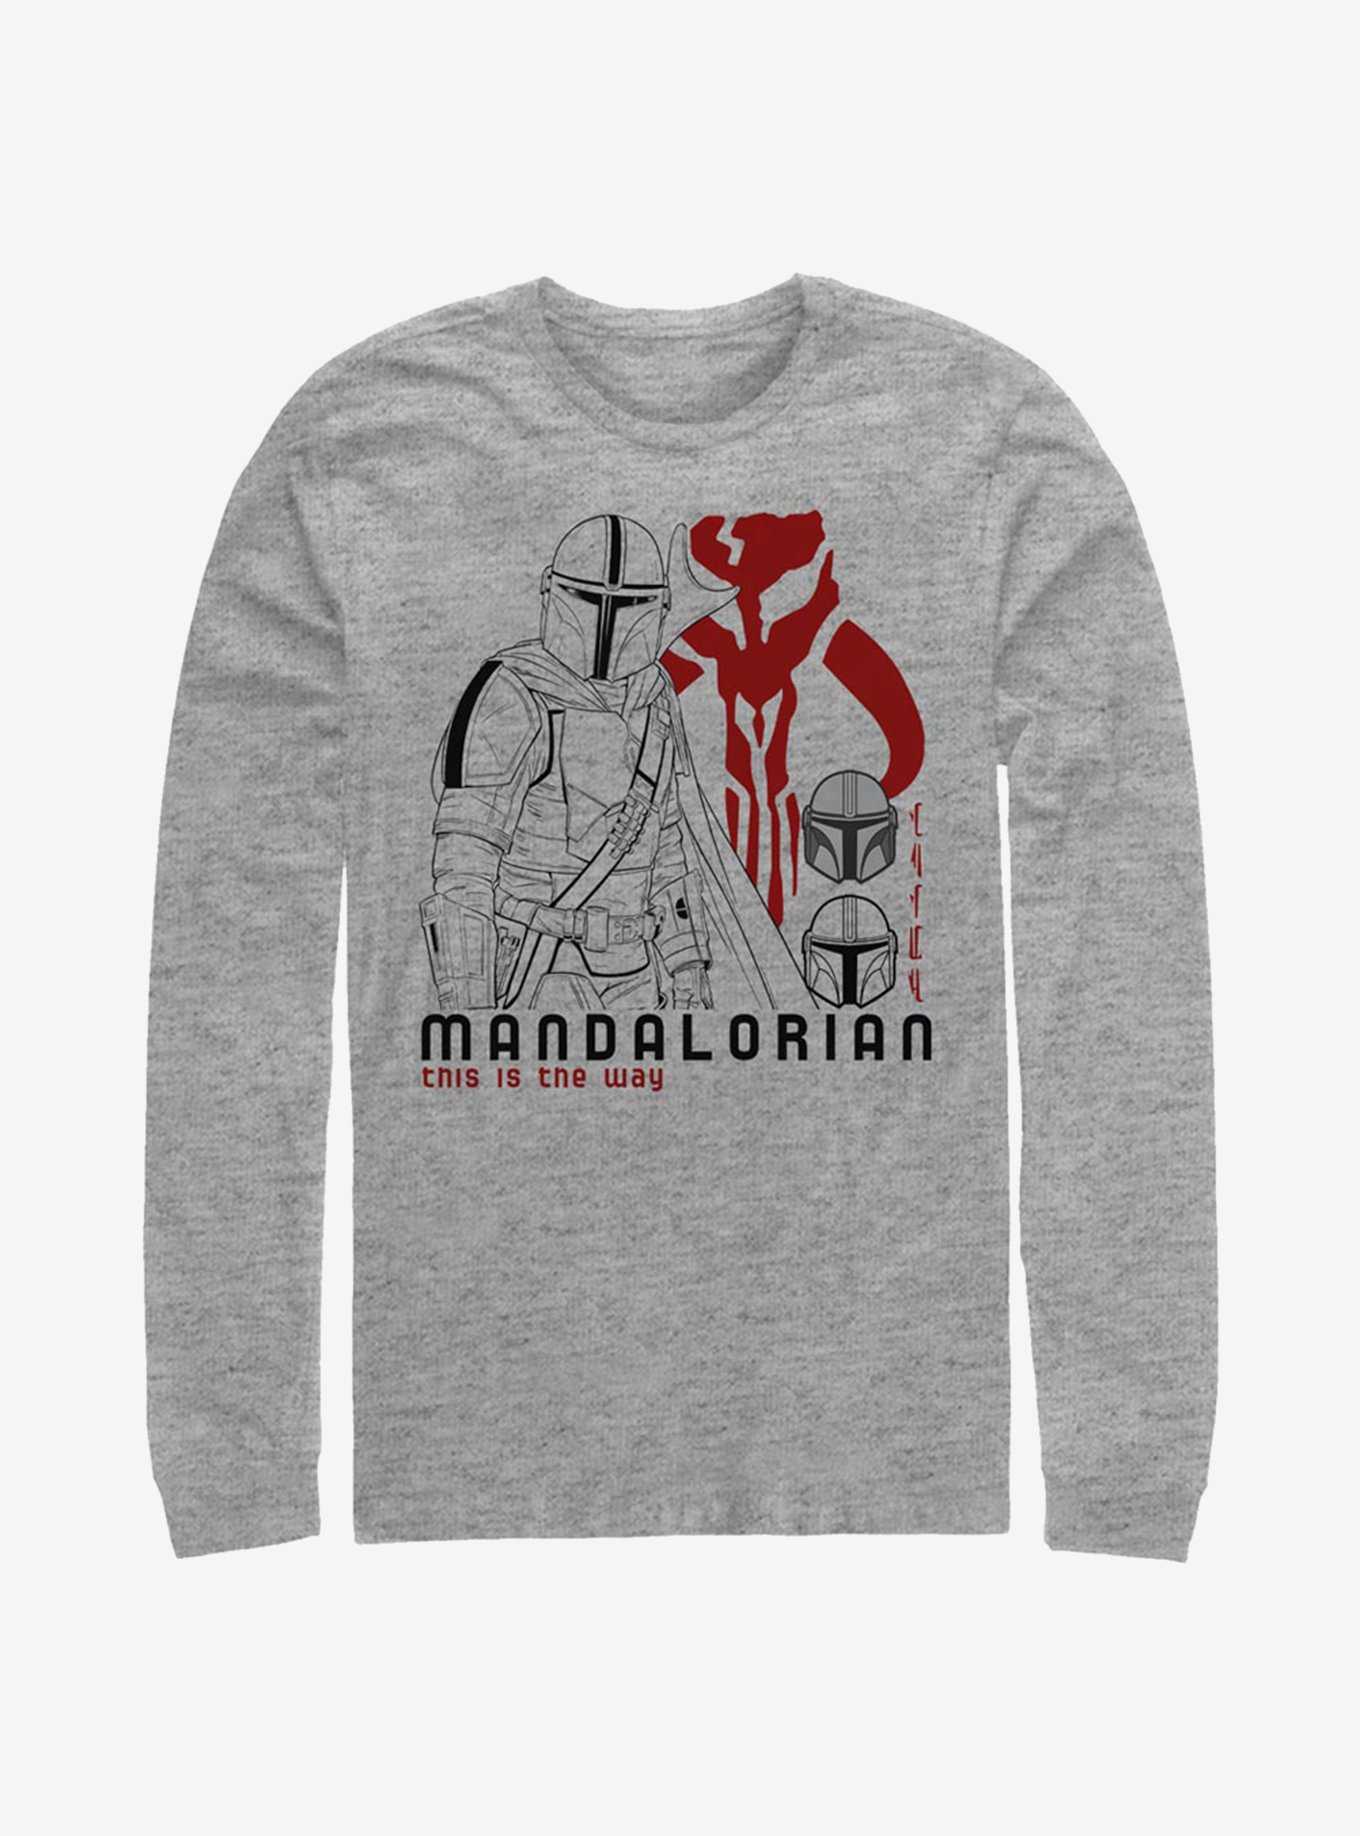 Star Wars The Mandalorian This Is The Way Long-Sleeve T-Shirt, , hi-res